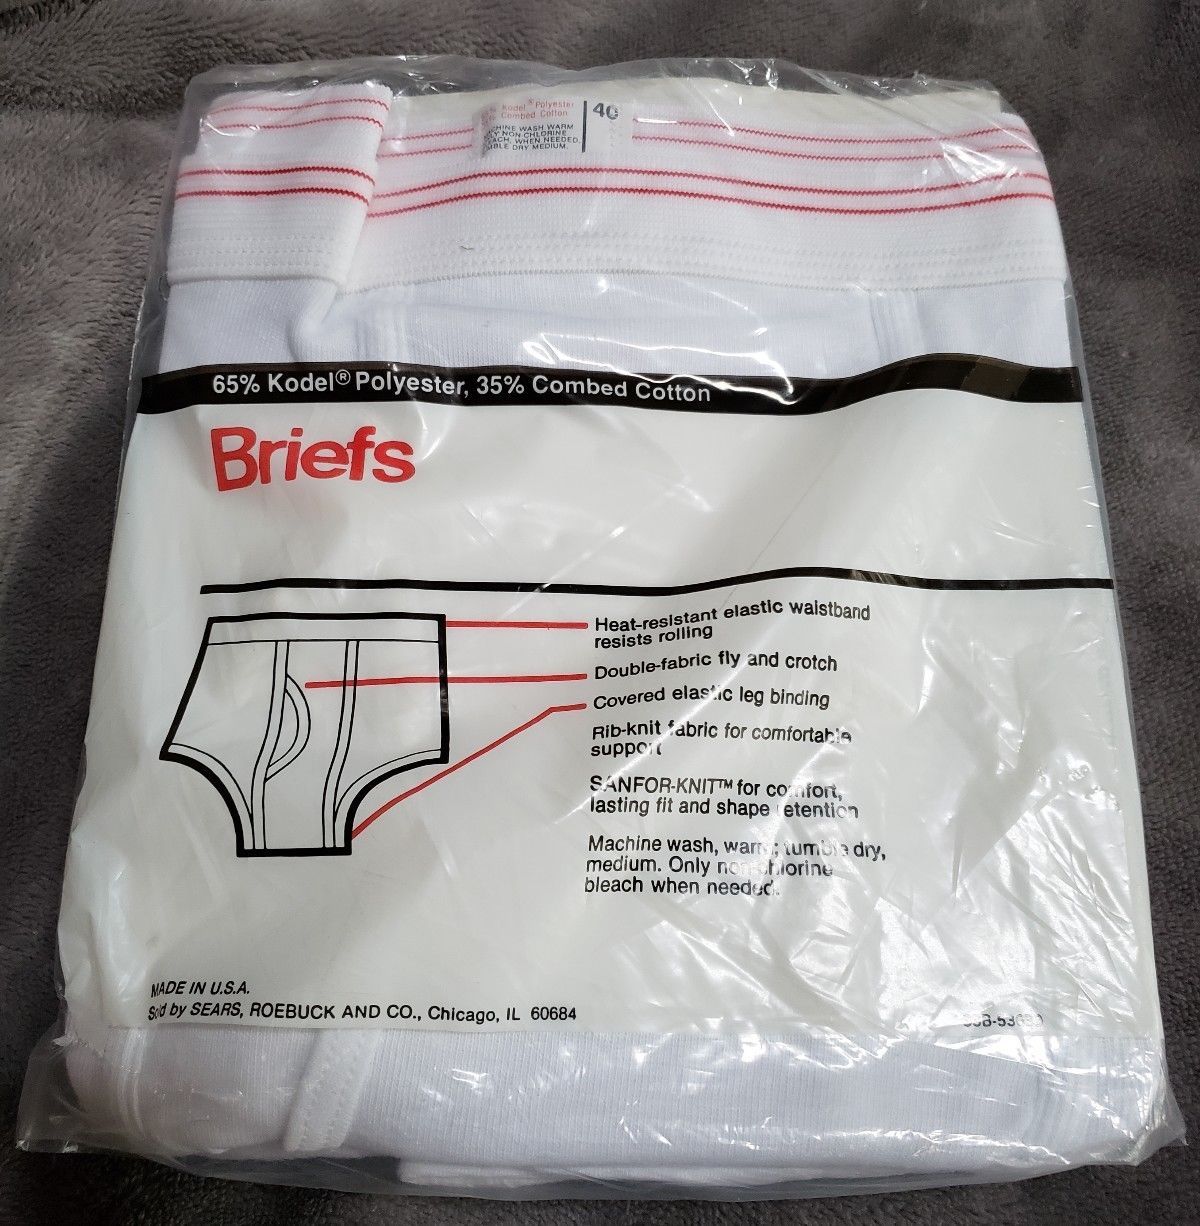 Vintage Sears Sanforknit White Briefs Pack and 50 similar items